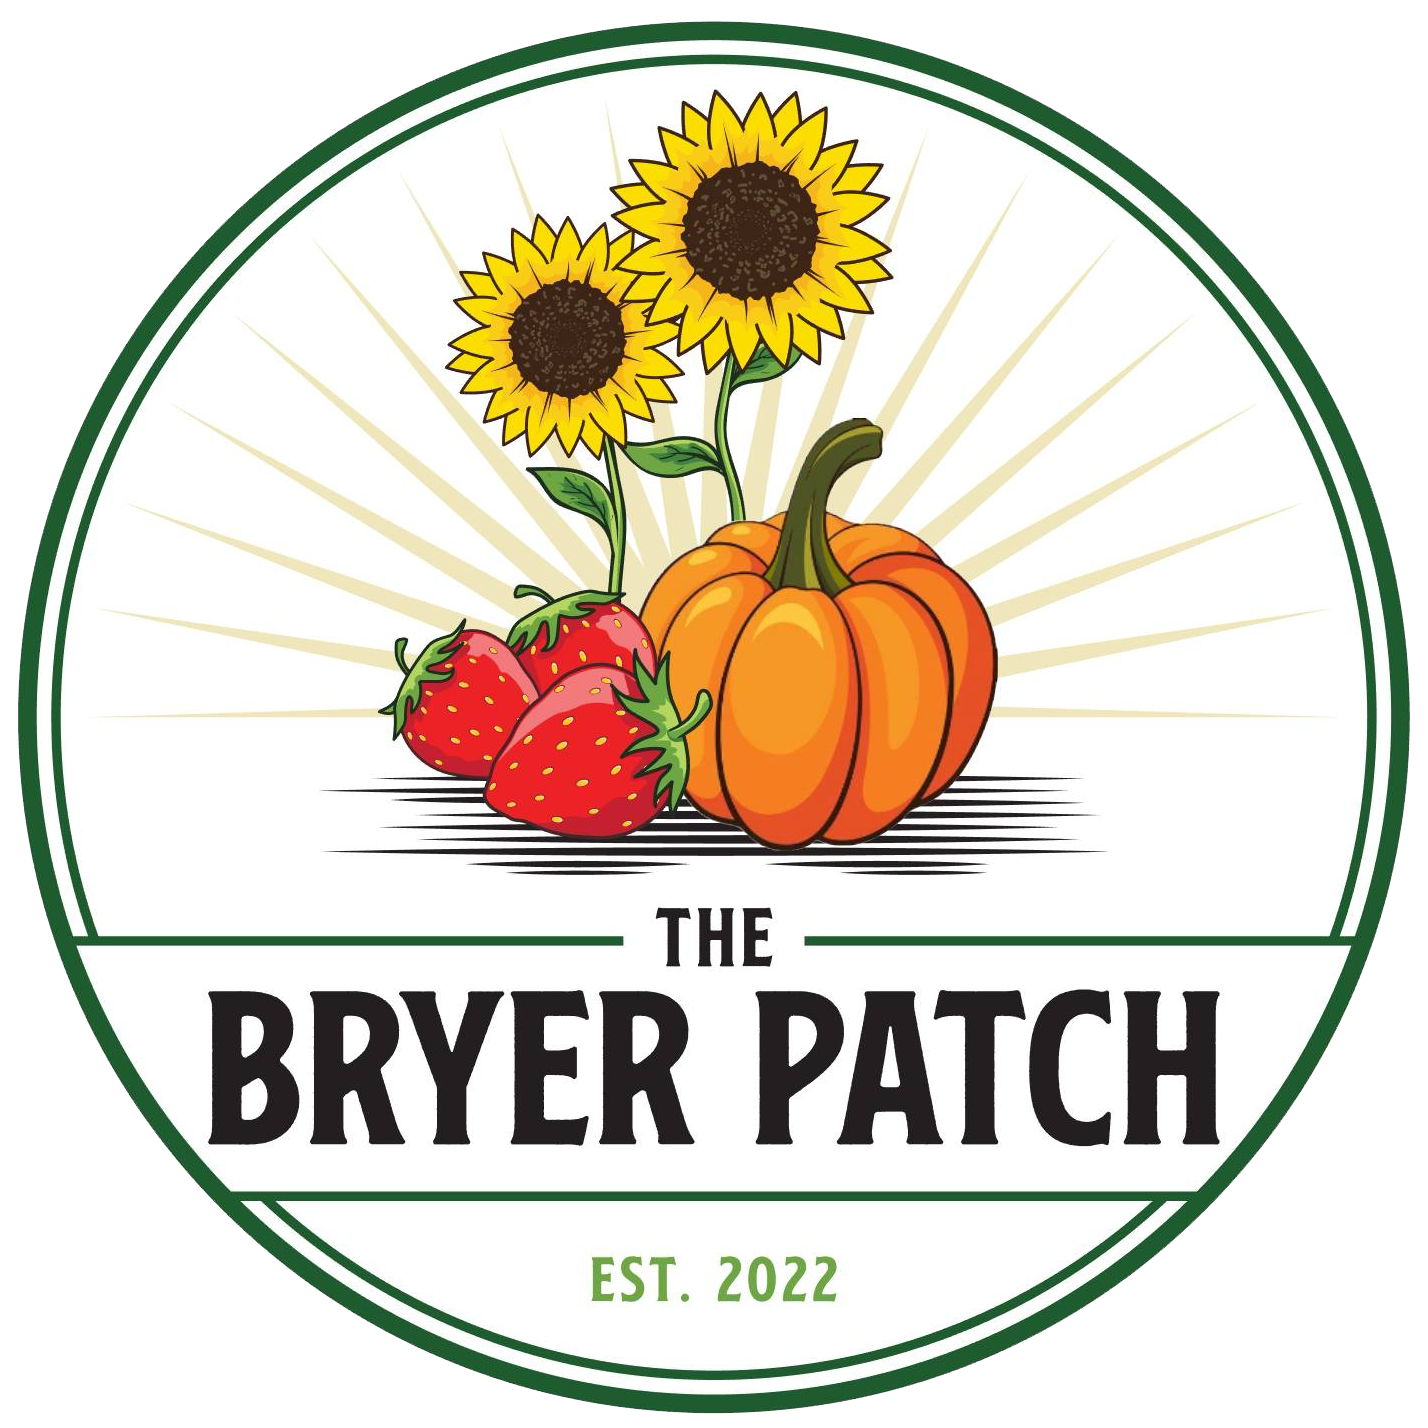 The Bryer Patch